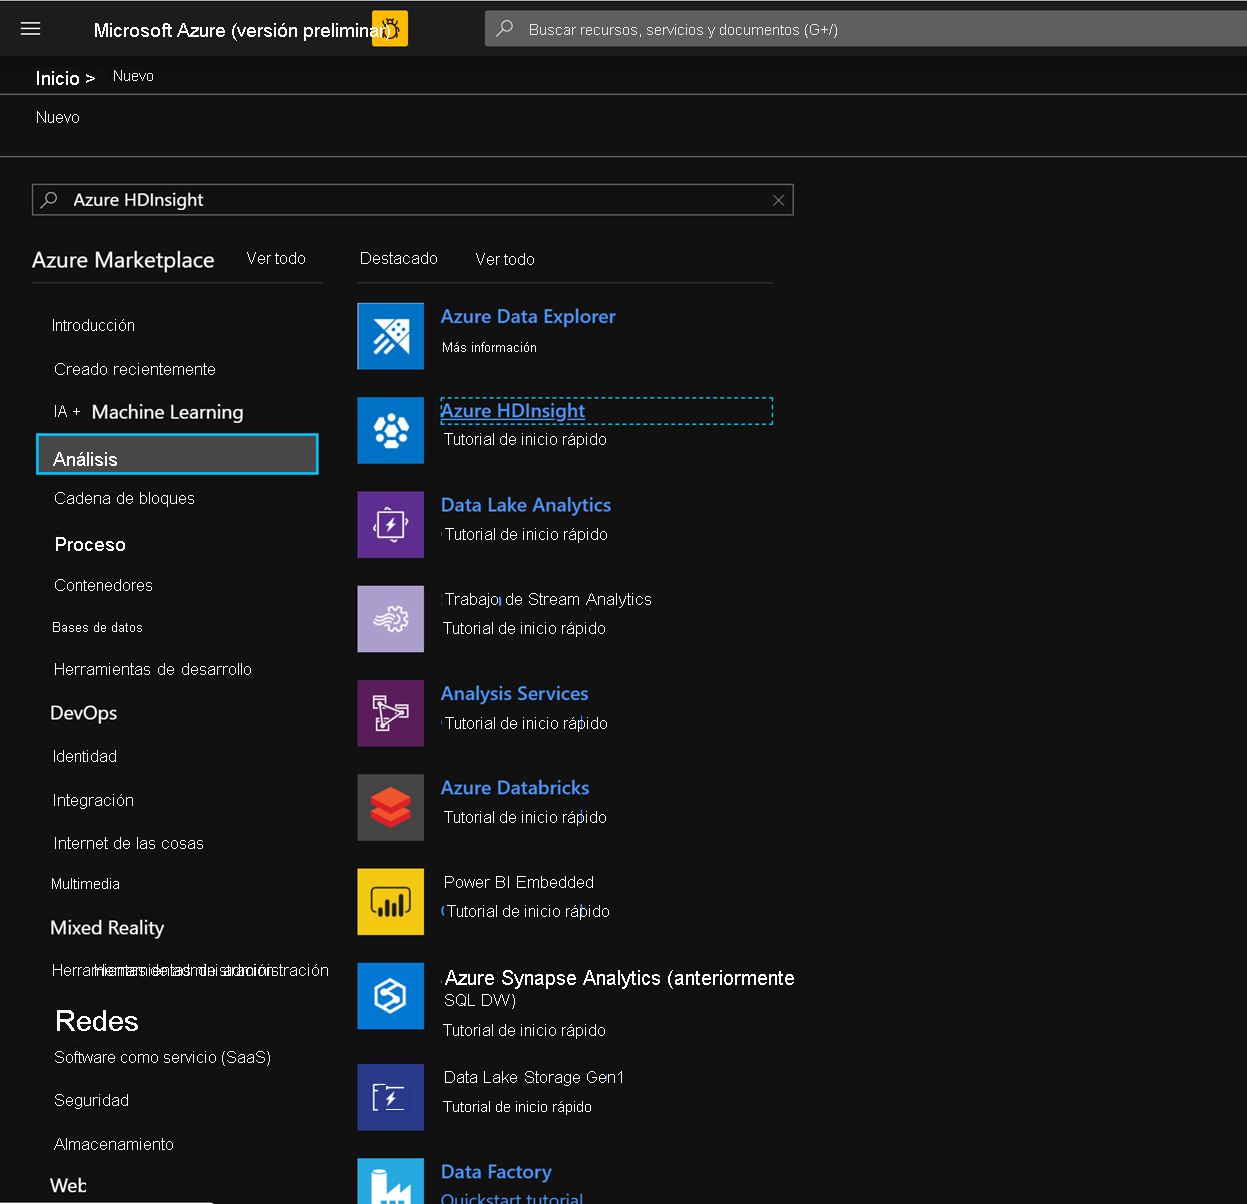 Azure HDInsight in the Azure Portal.